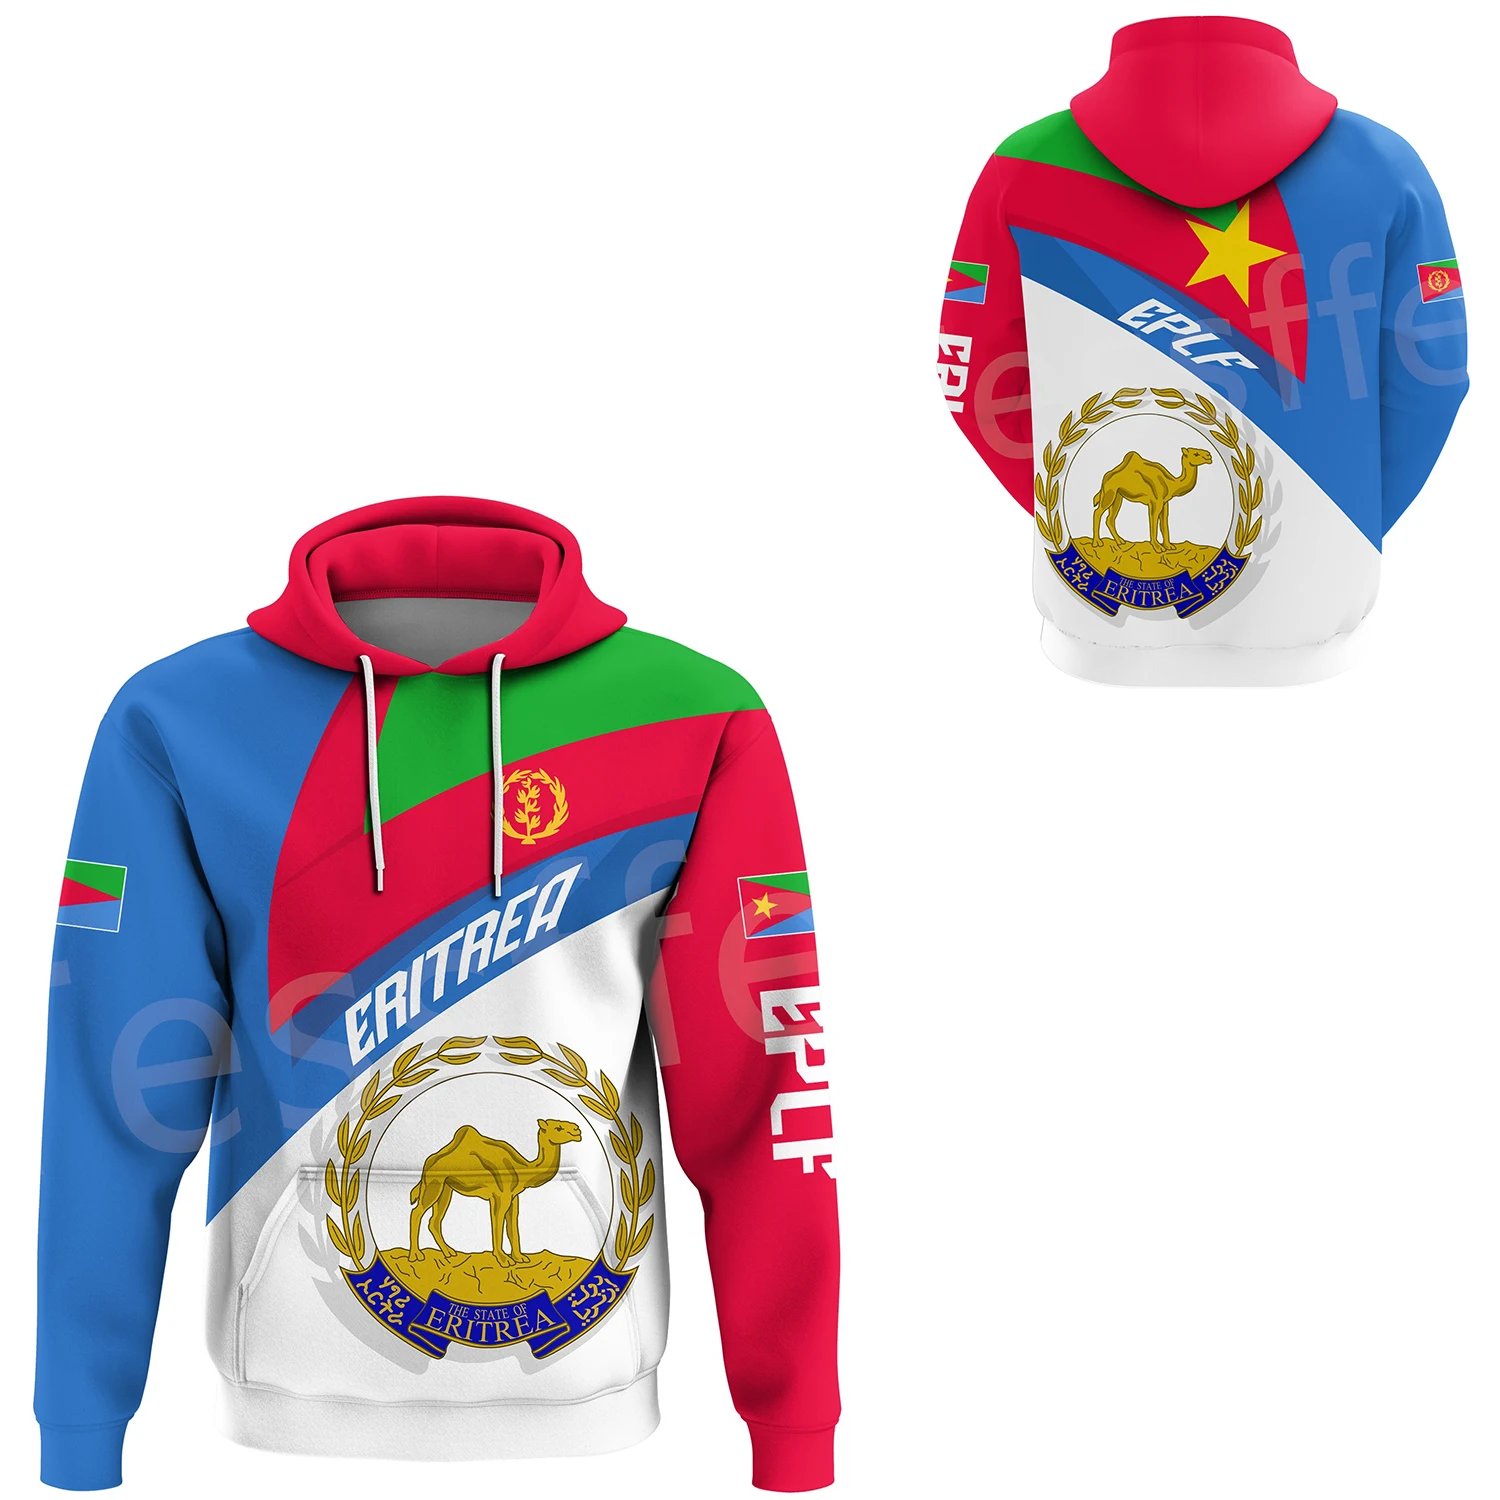 Black History Africa Country Eritrea Colorful Retro Streetwear Tracksuit 3DPrint Men/Women Unisex Casual Funny Jacket Hoodies 7A